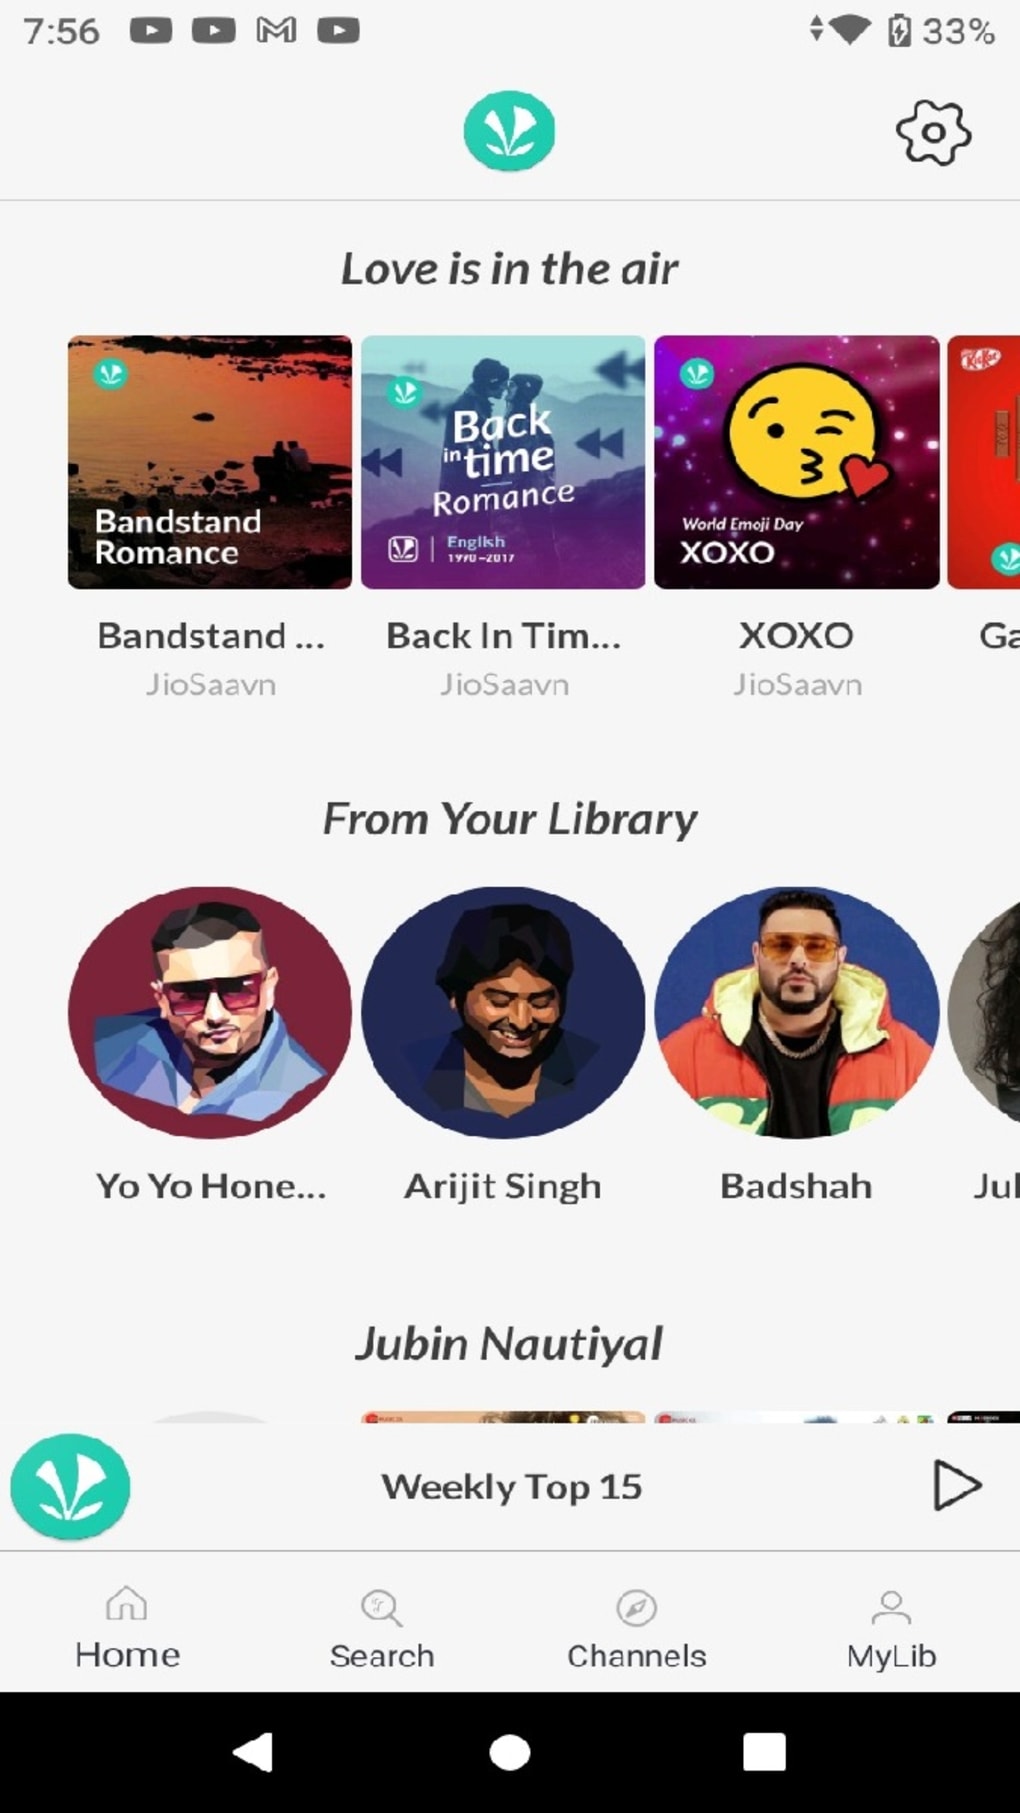 It's You - Song Download from It's You @ JioSaavn